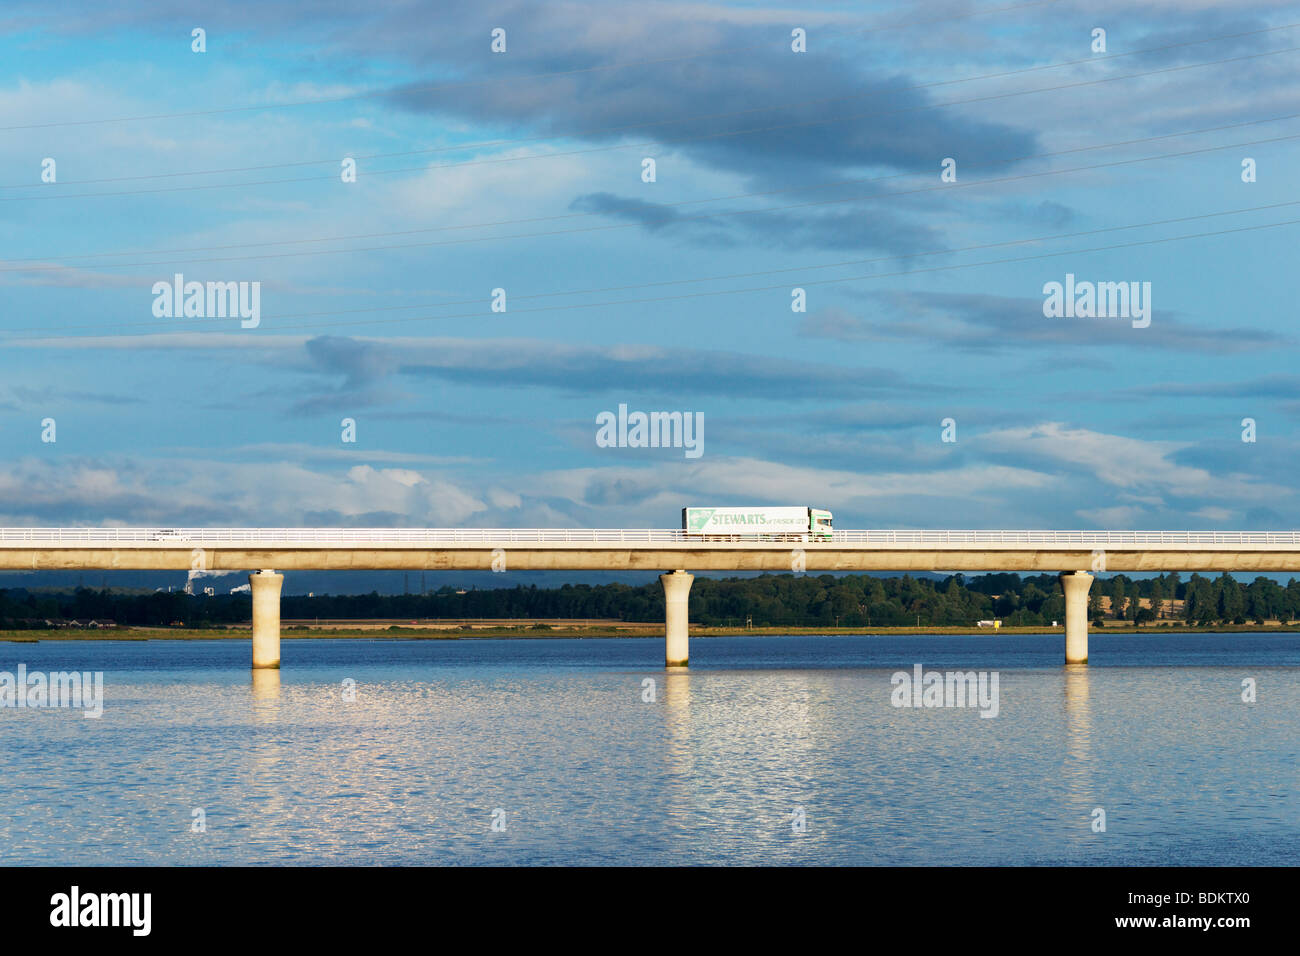 HGV on the Clackmannanshire Bridge across the Firth of Forth, Scotland. Stock Photo